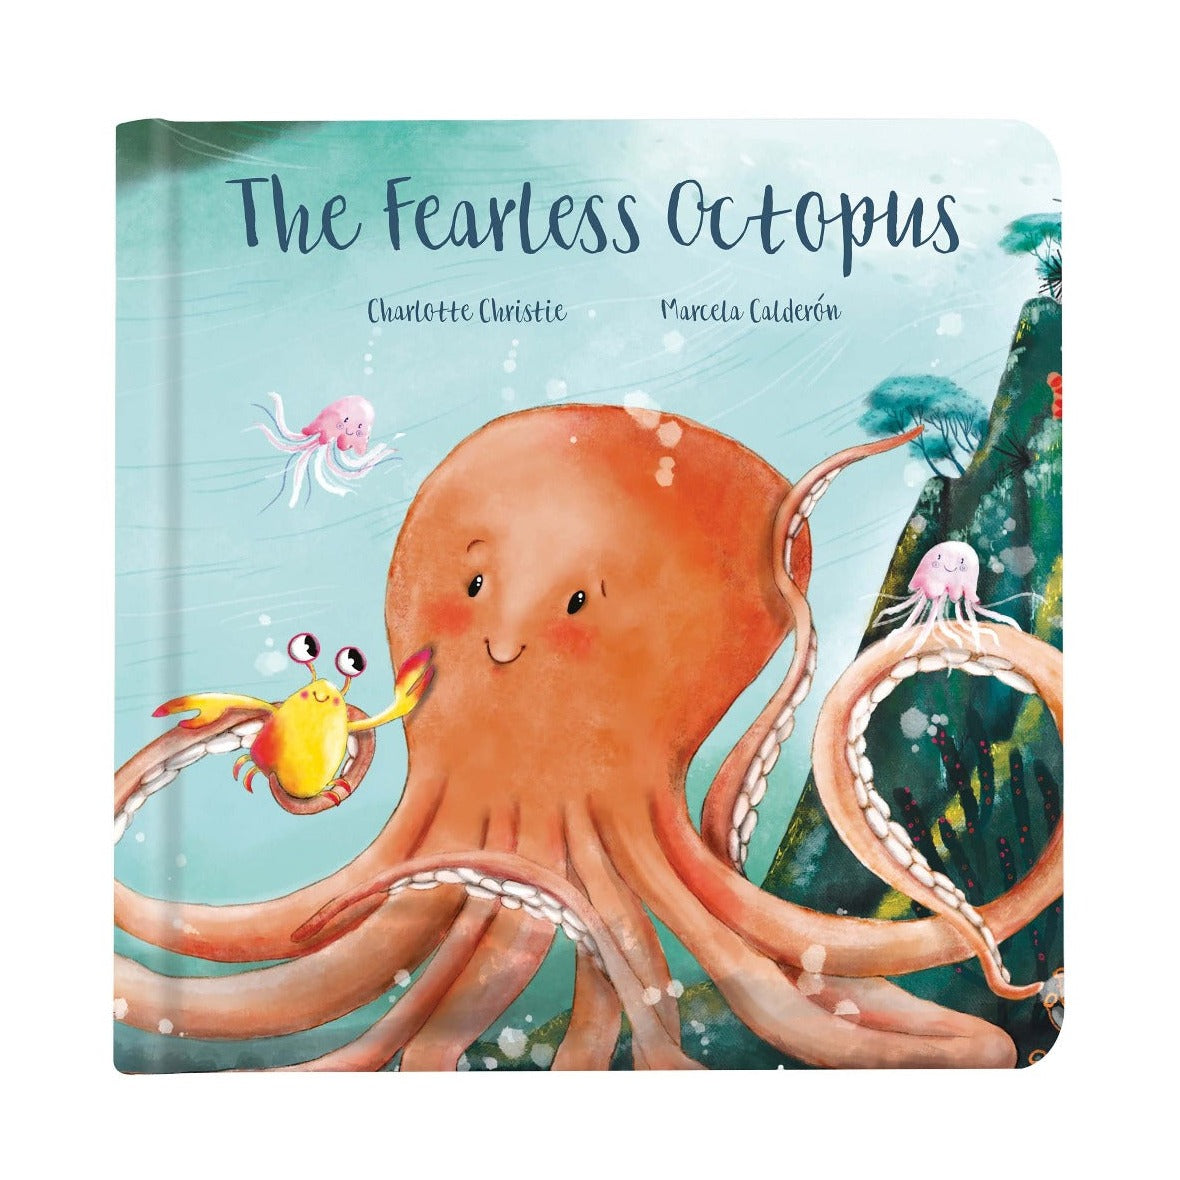 Jellycat octopus book - angus and dudley